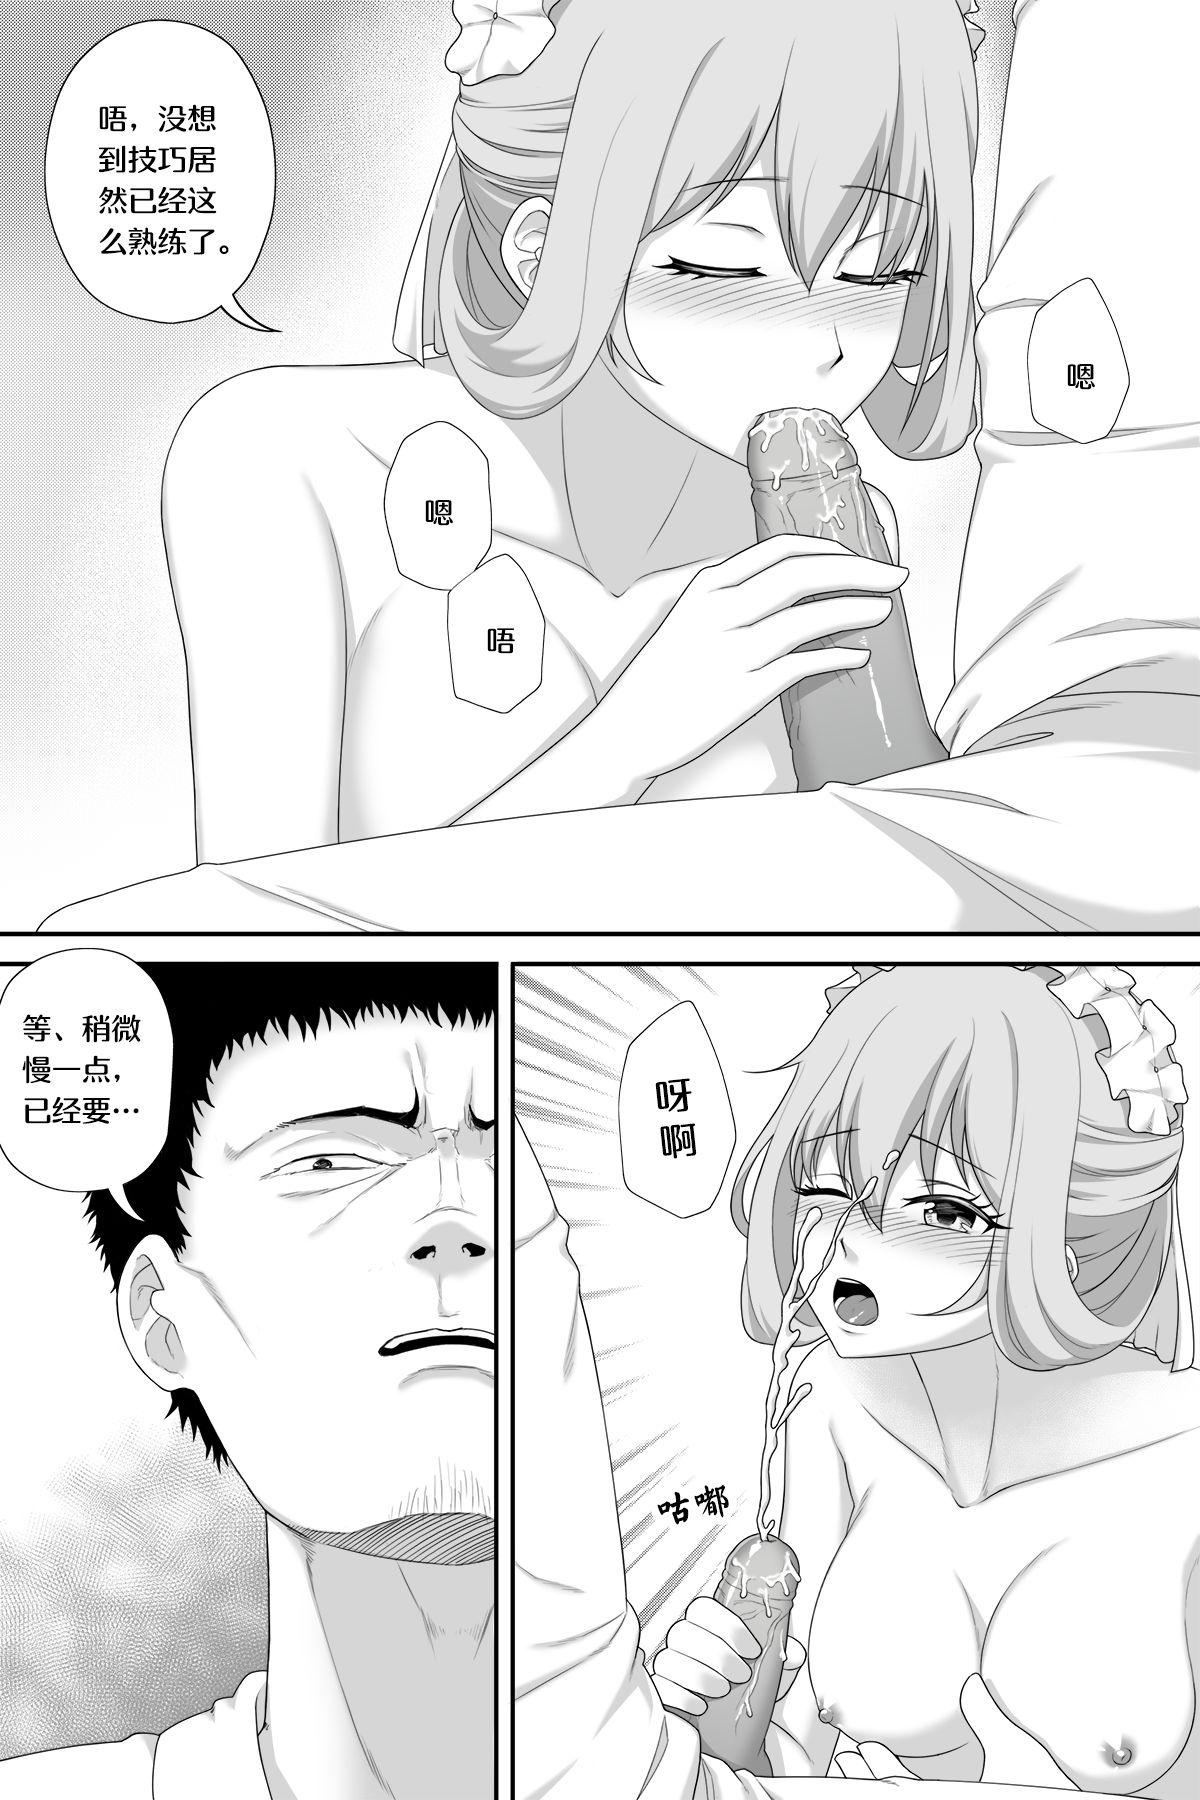 Watersports 花女仆的侍奉 - Warship girls Fist - Page 7